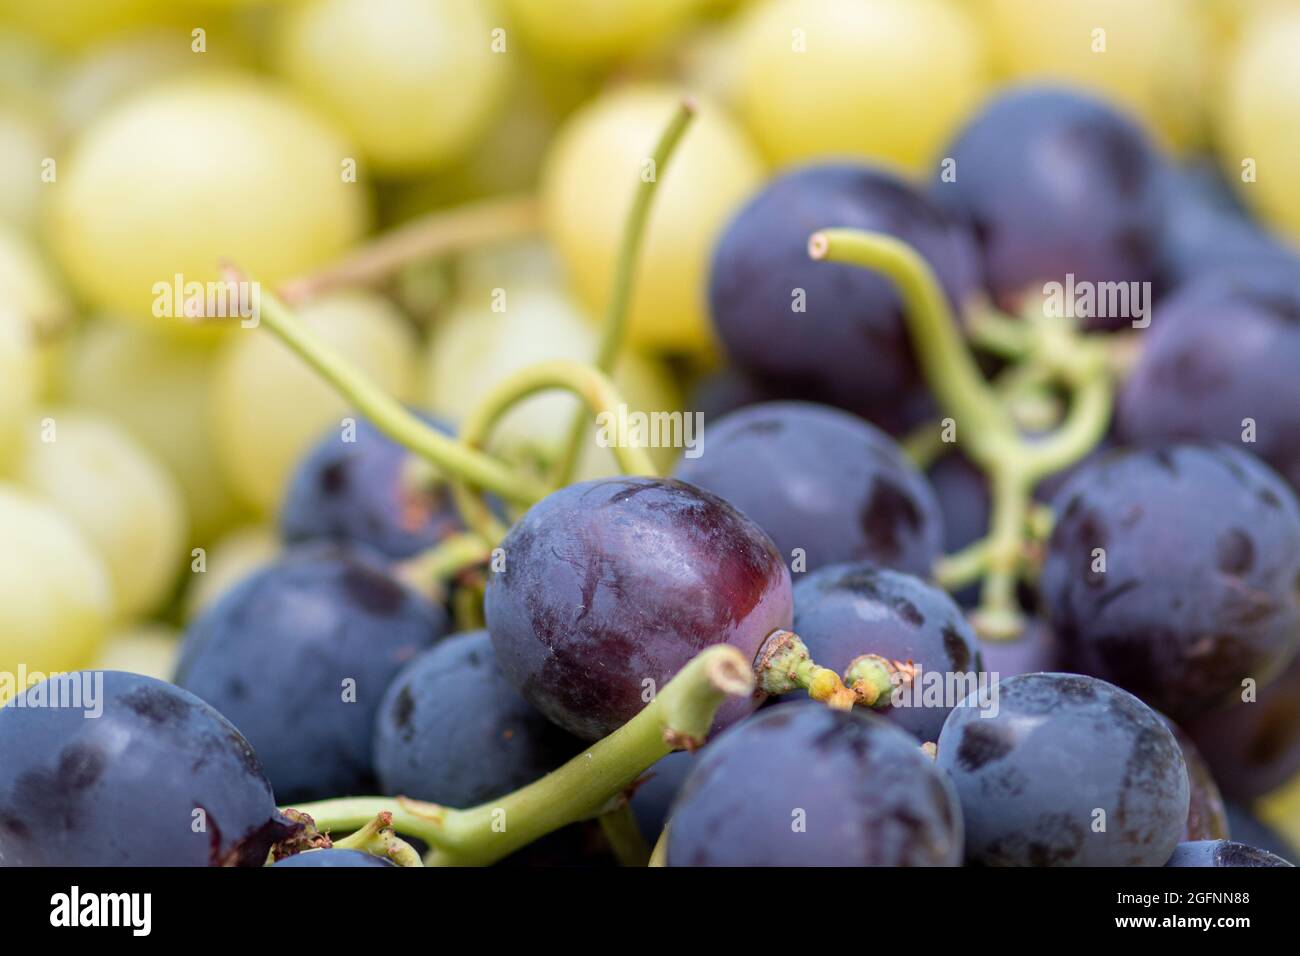 Mixed black and white table grapes fruit in a street food market, close up Stock Photo